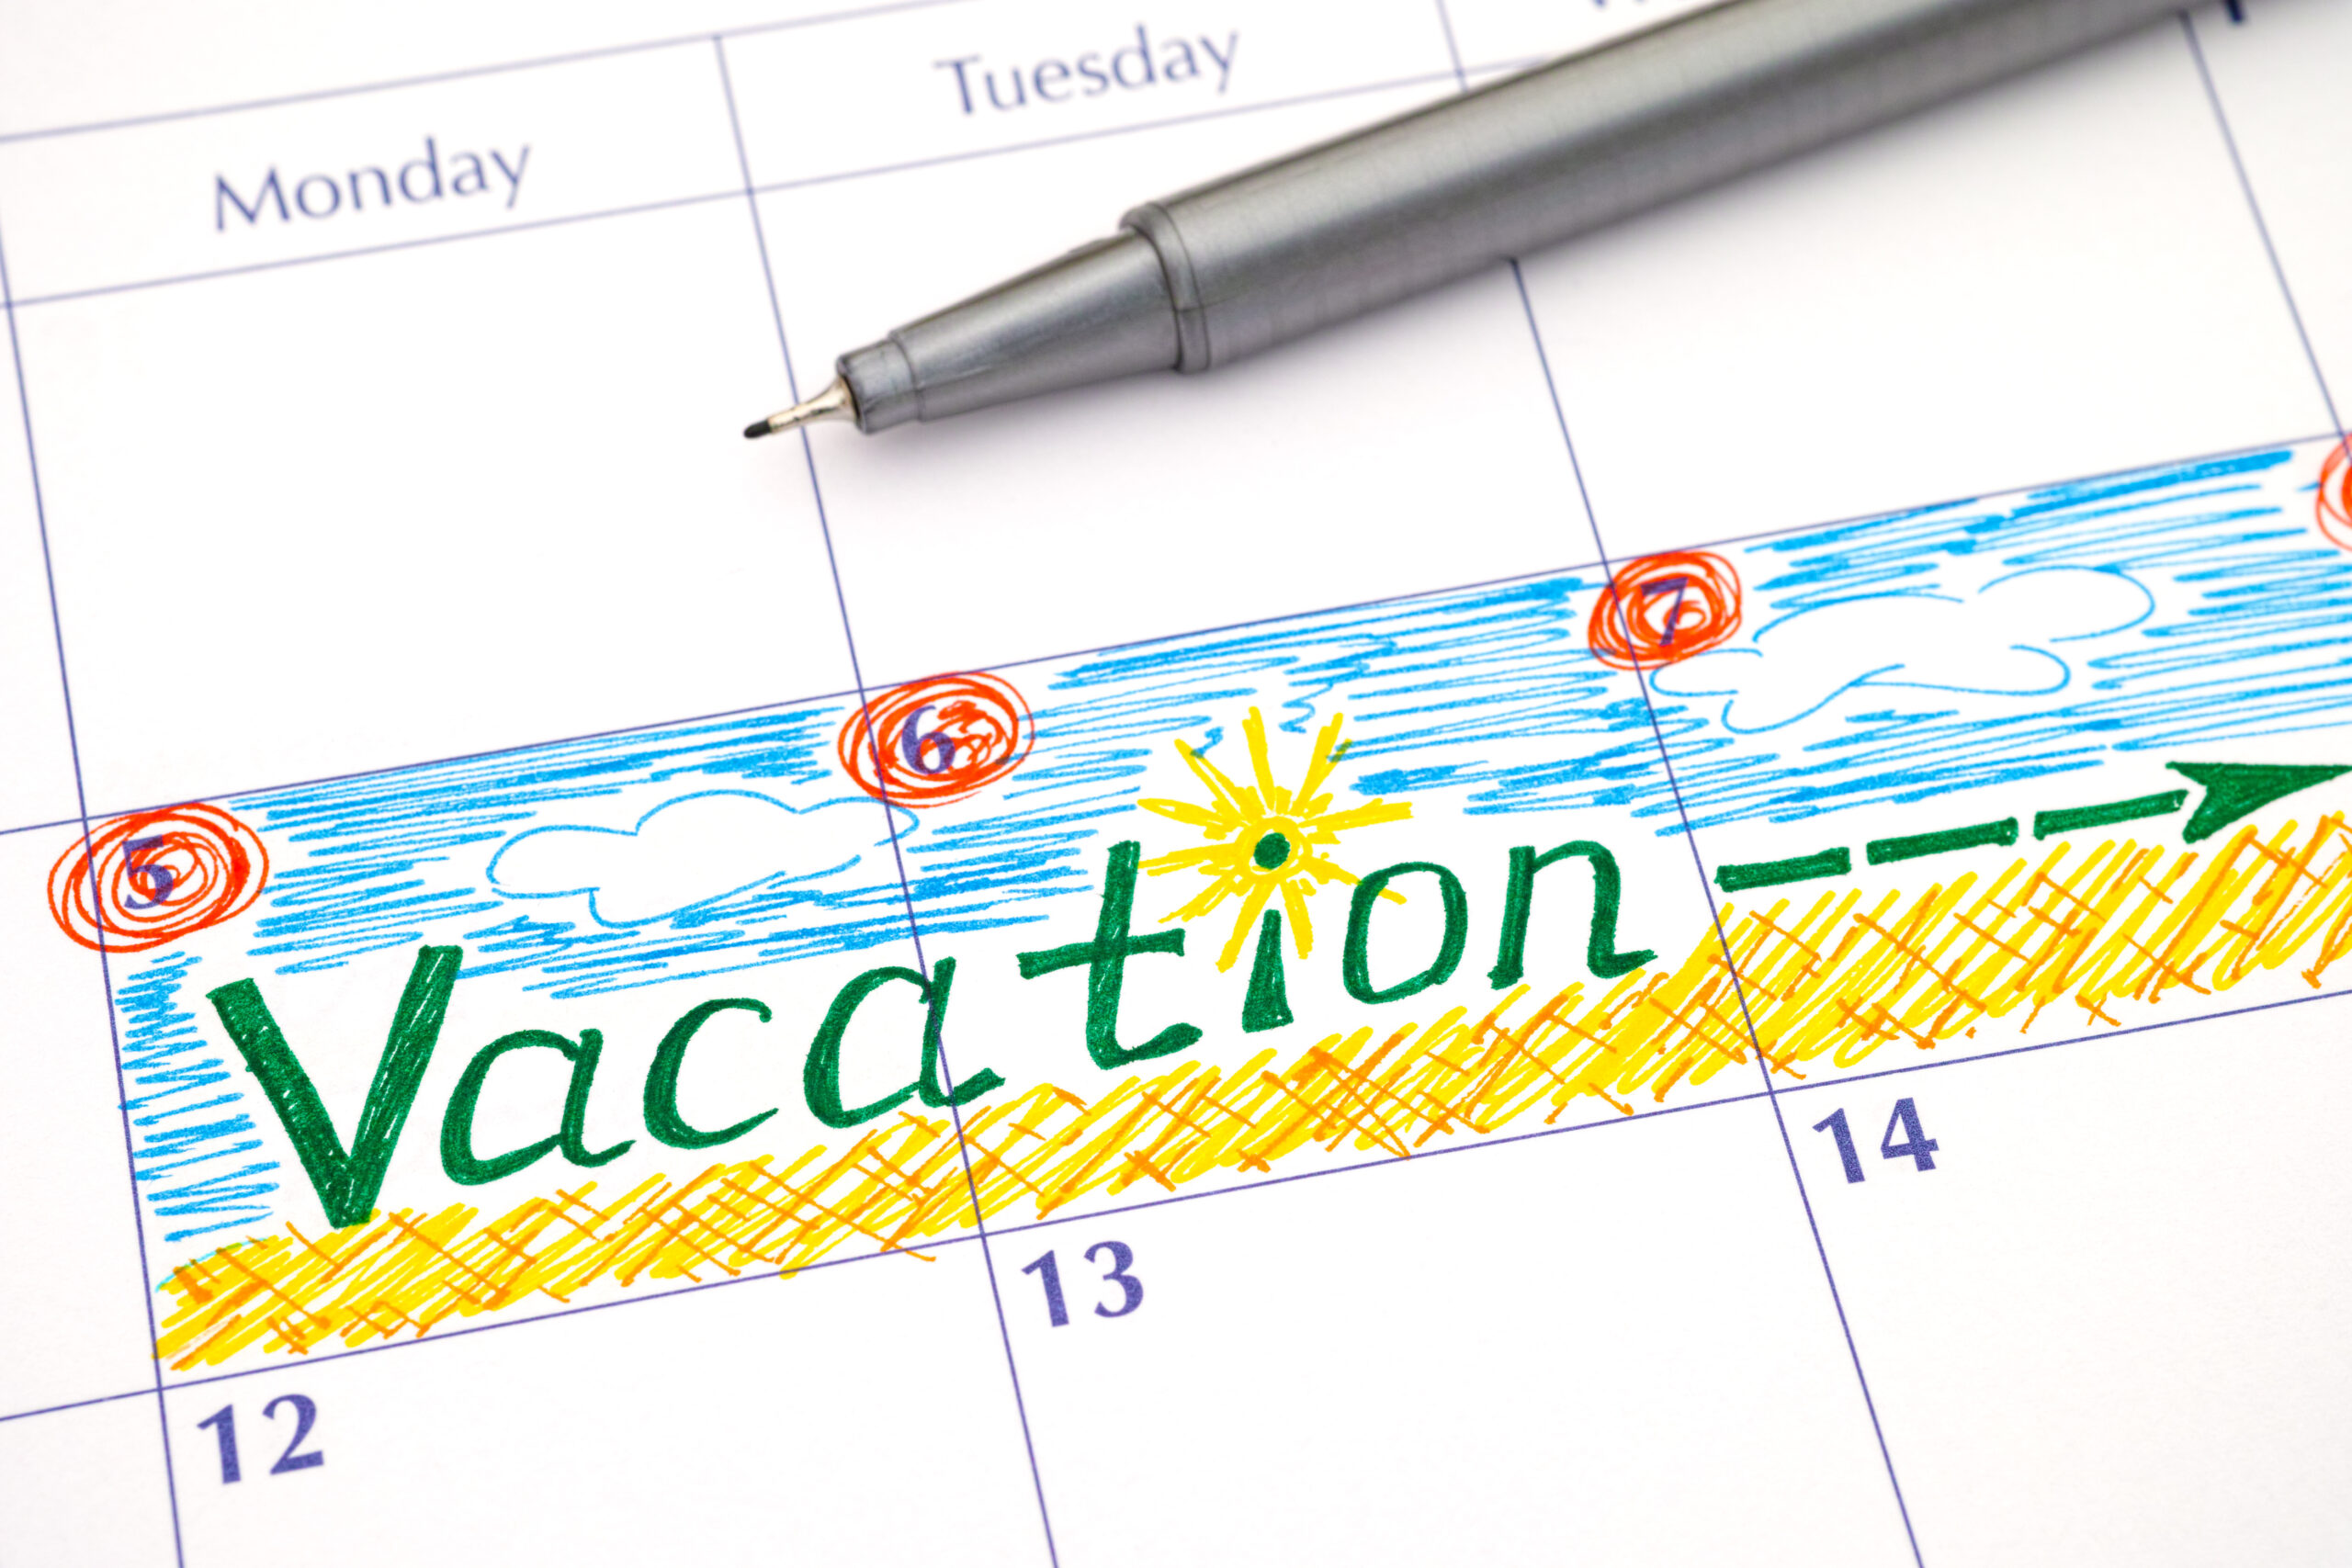 Why Locum Tenens is Vacation-Friendly for Providers